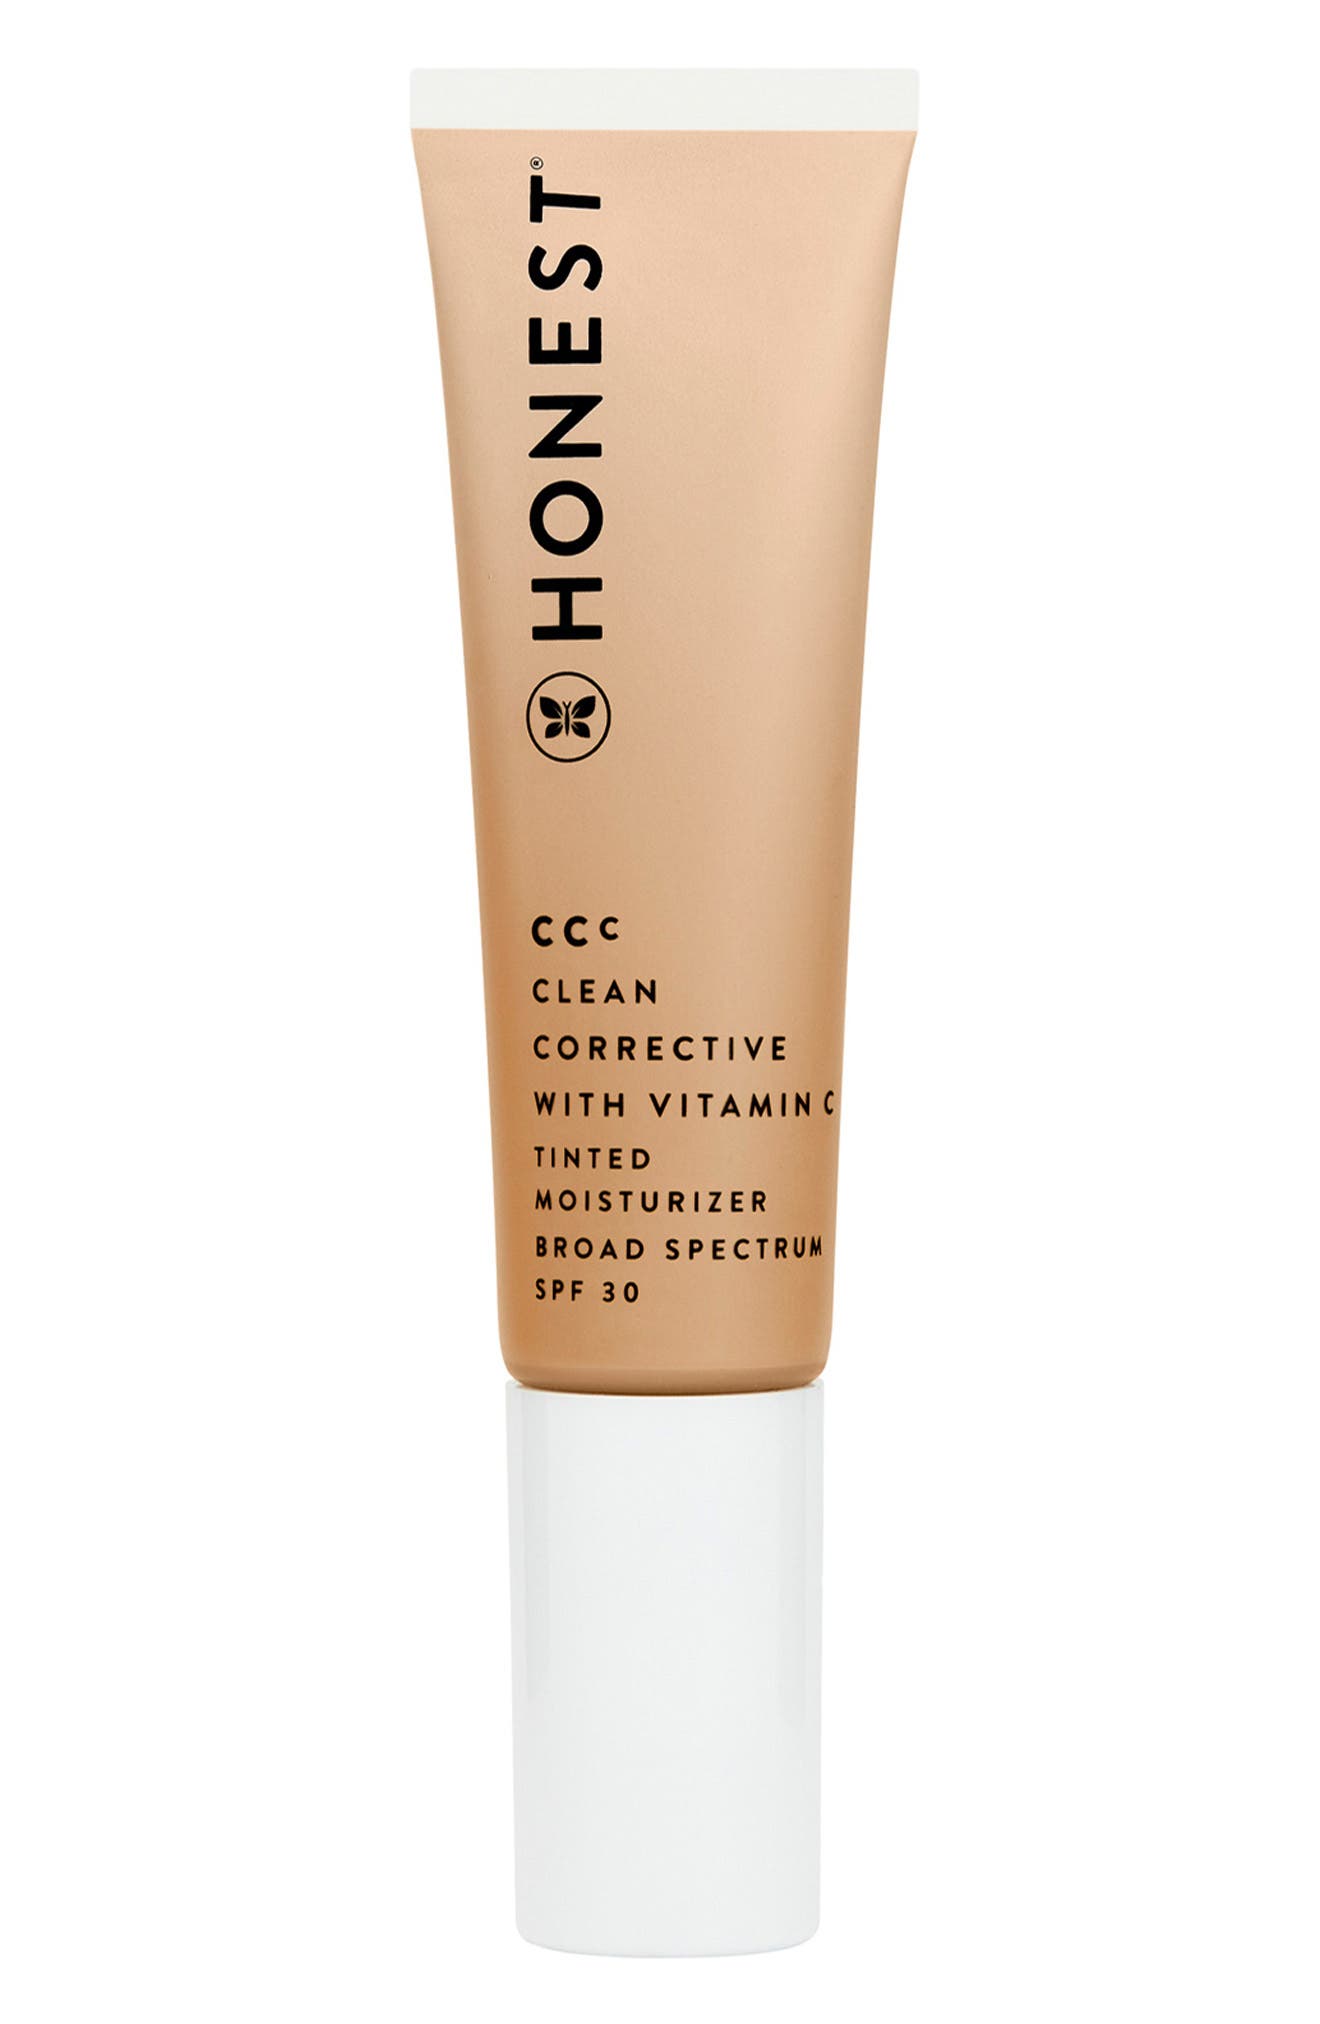 CCC CLEAN CORRECTIVE SPF 30 TINTED MOISTURIZER-picture-0